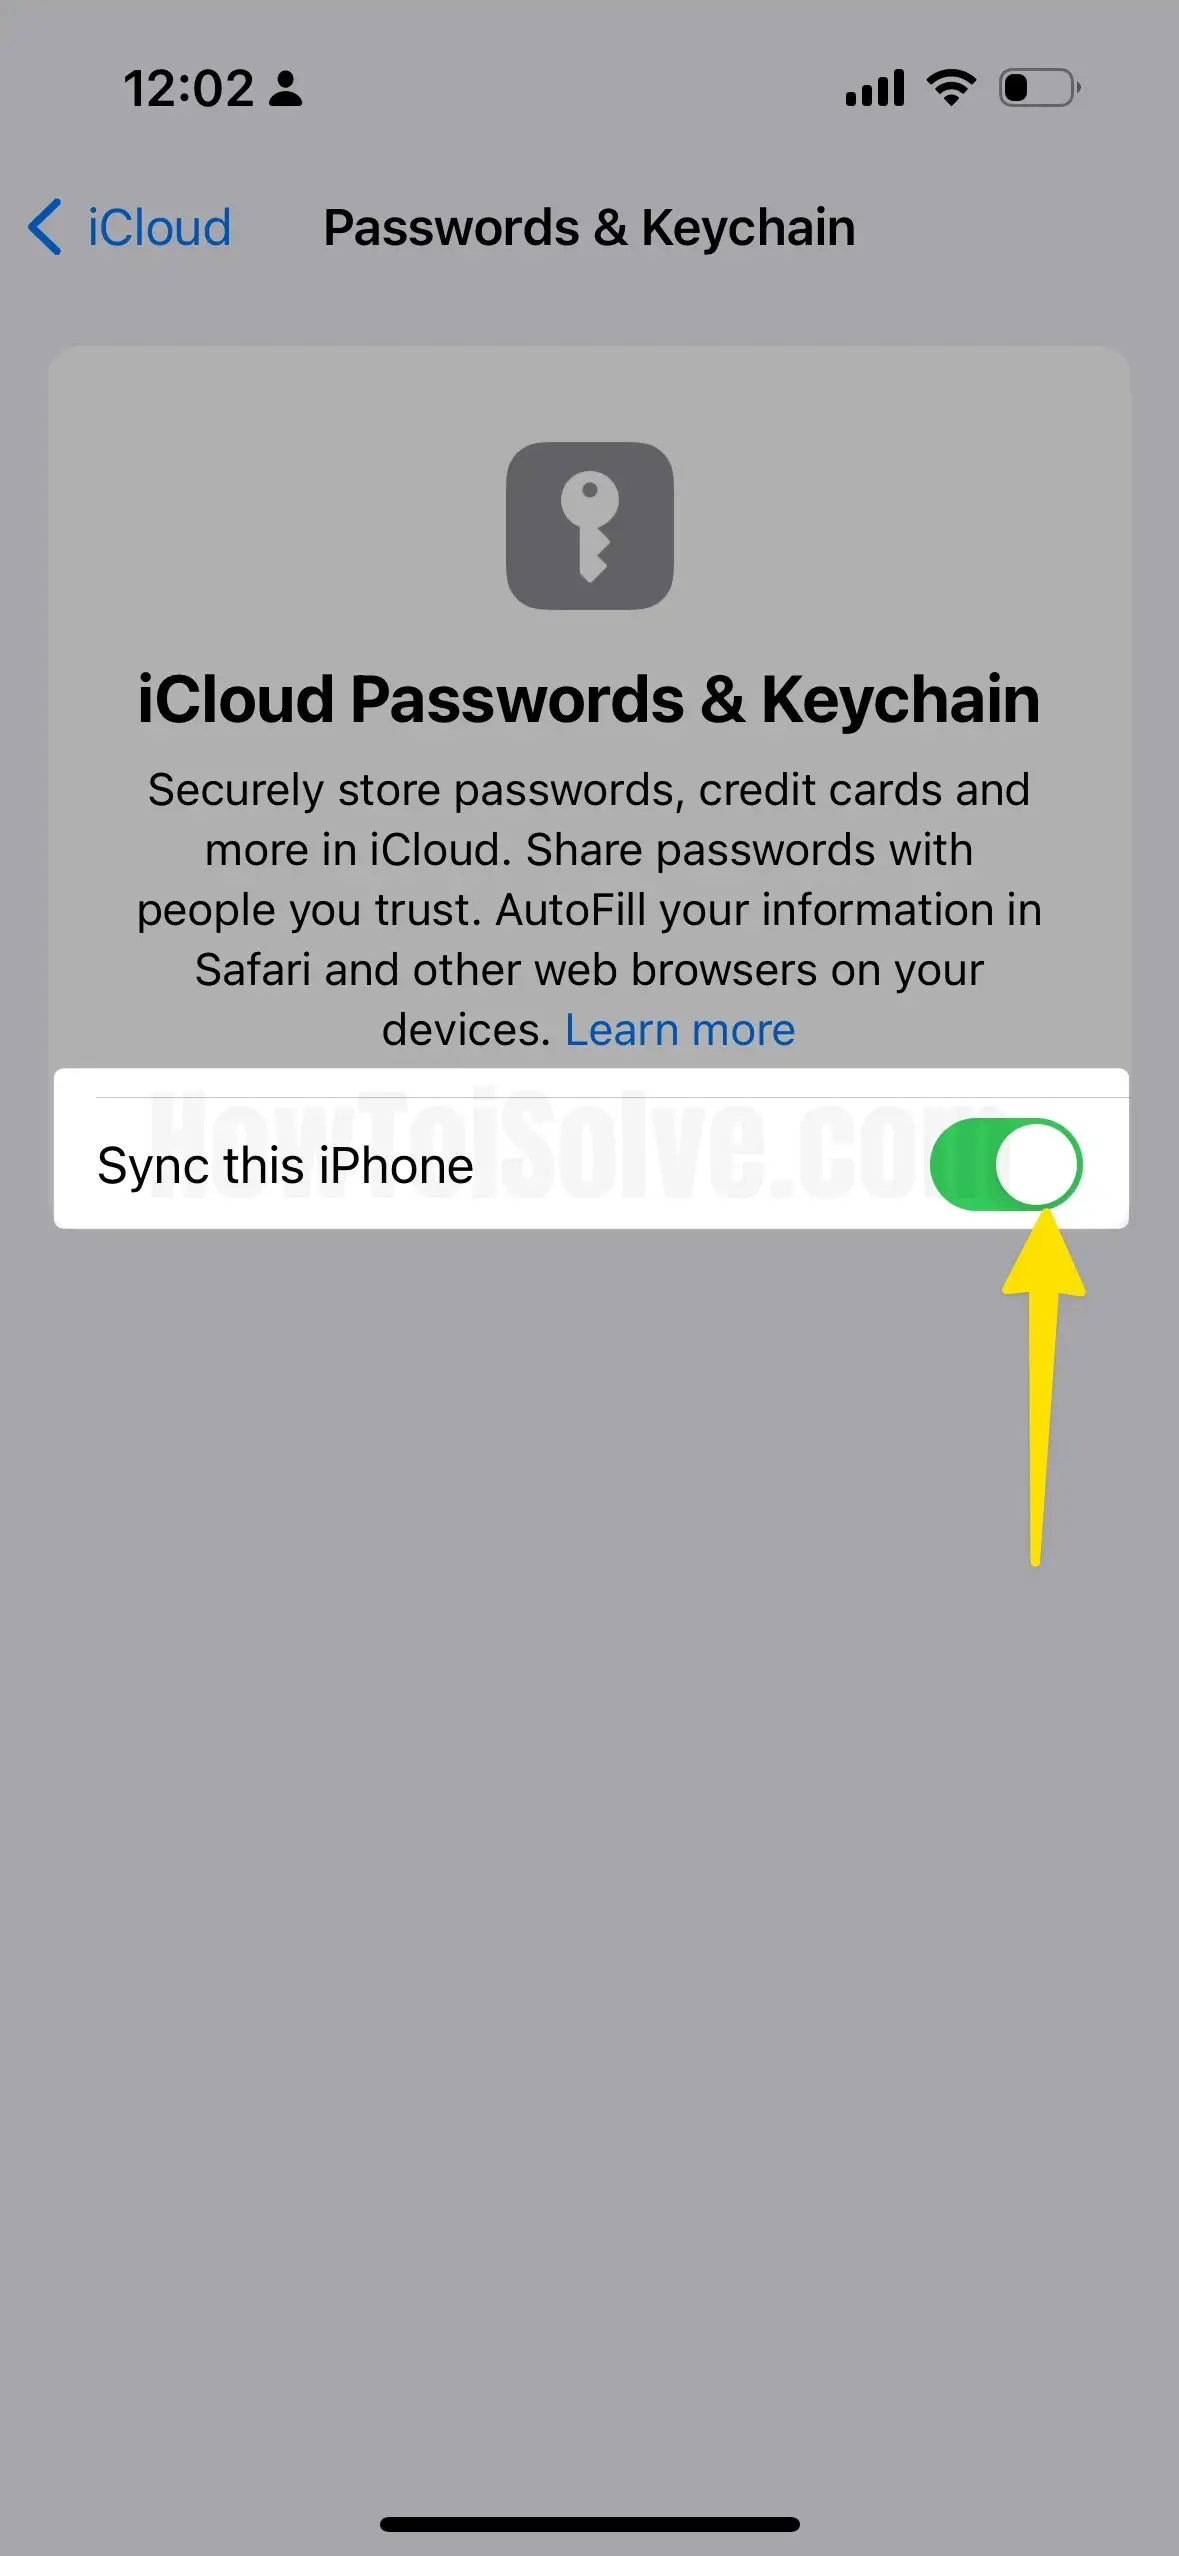 Enable Toggle Sync This iPhone On iPhone